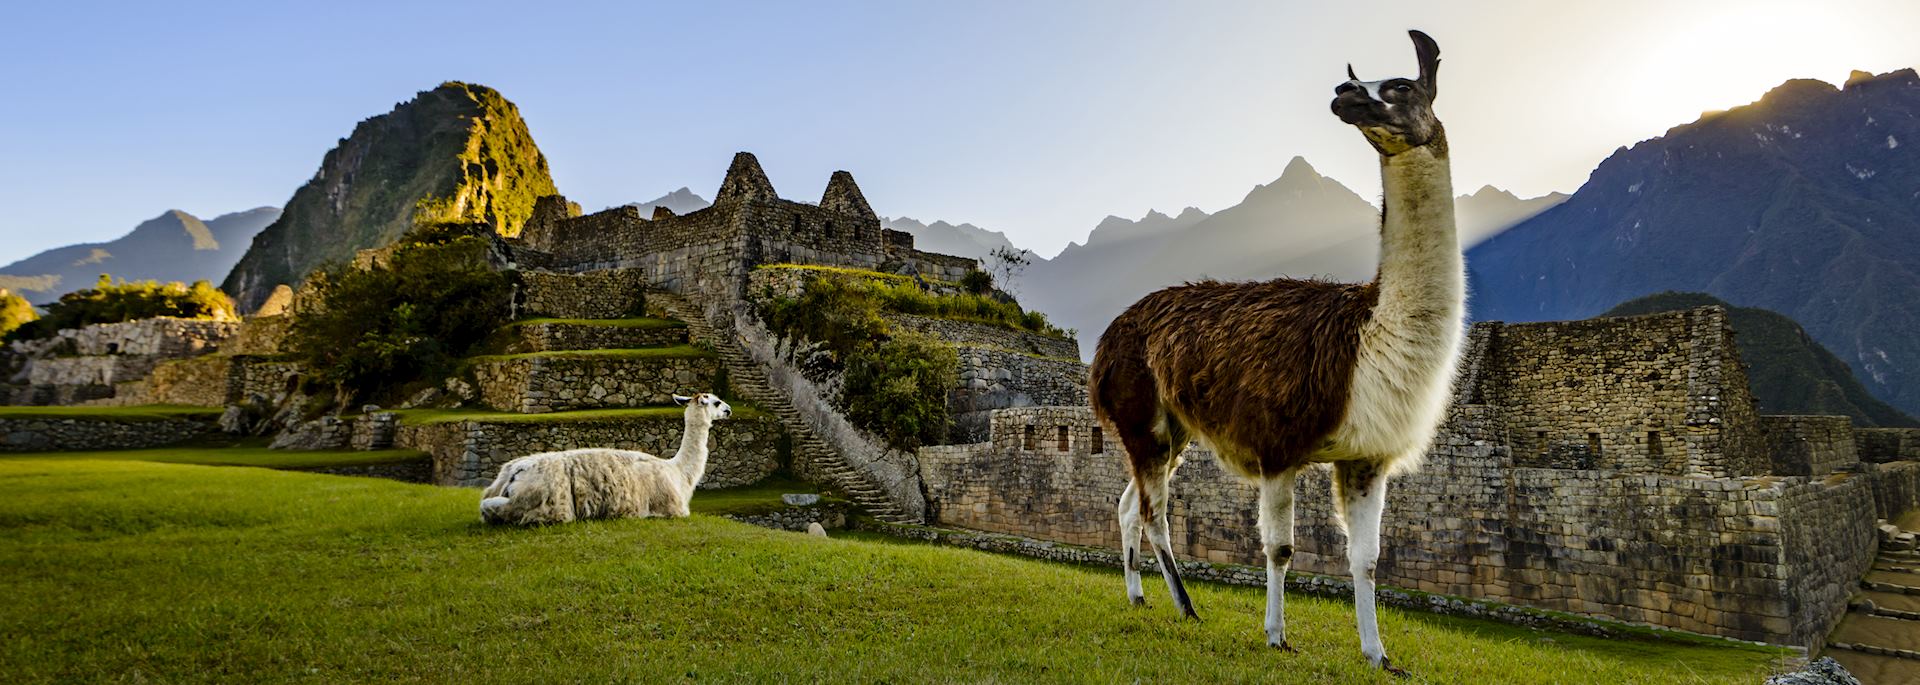 Win a 10-day Audley trip to Peru